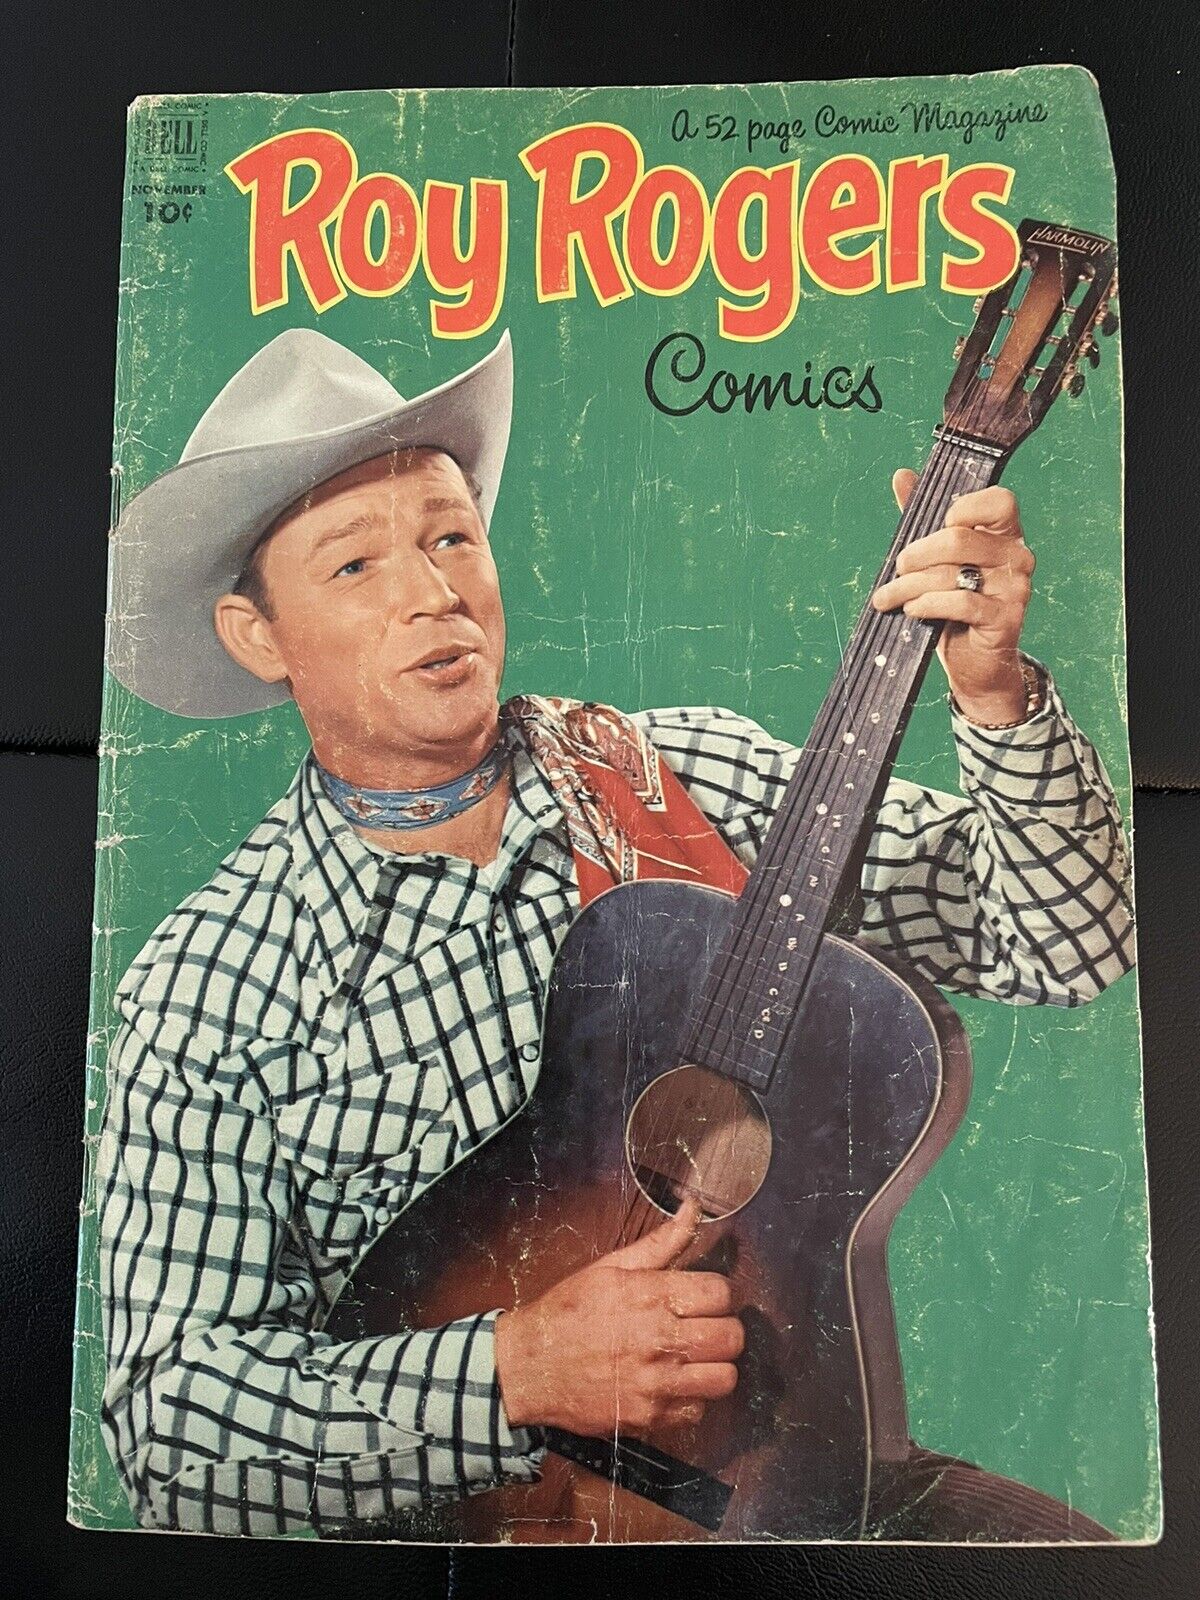 ROY ROGERS #59 - Dell Comics - MOVIE/TV WESTERN - 1952 - VERY NICE